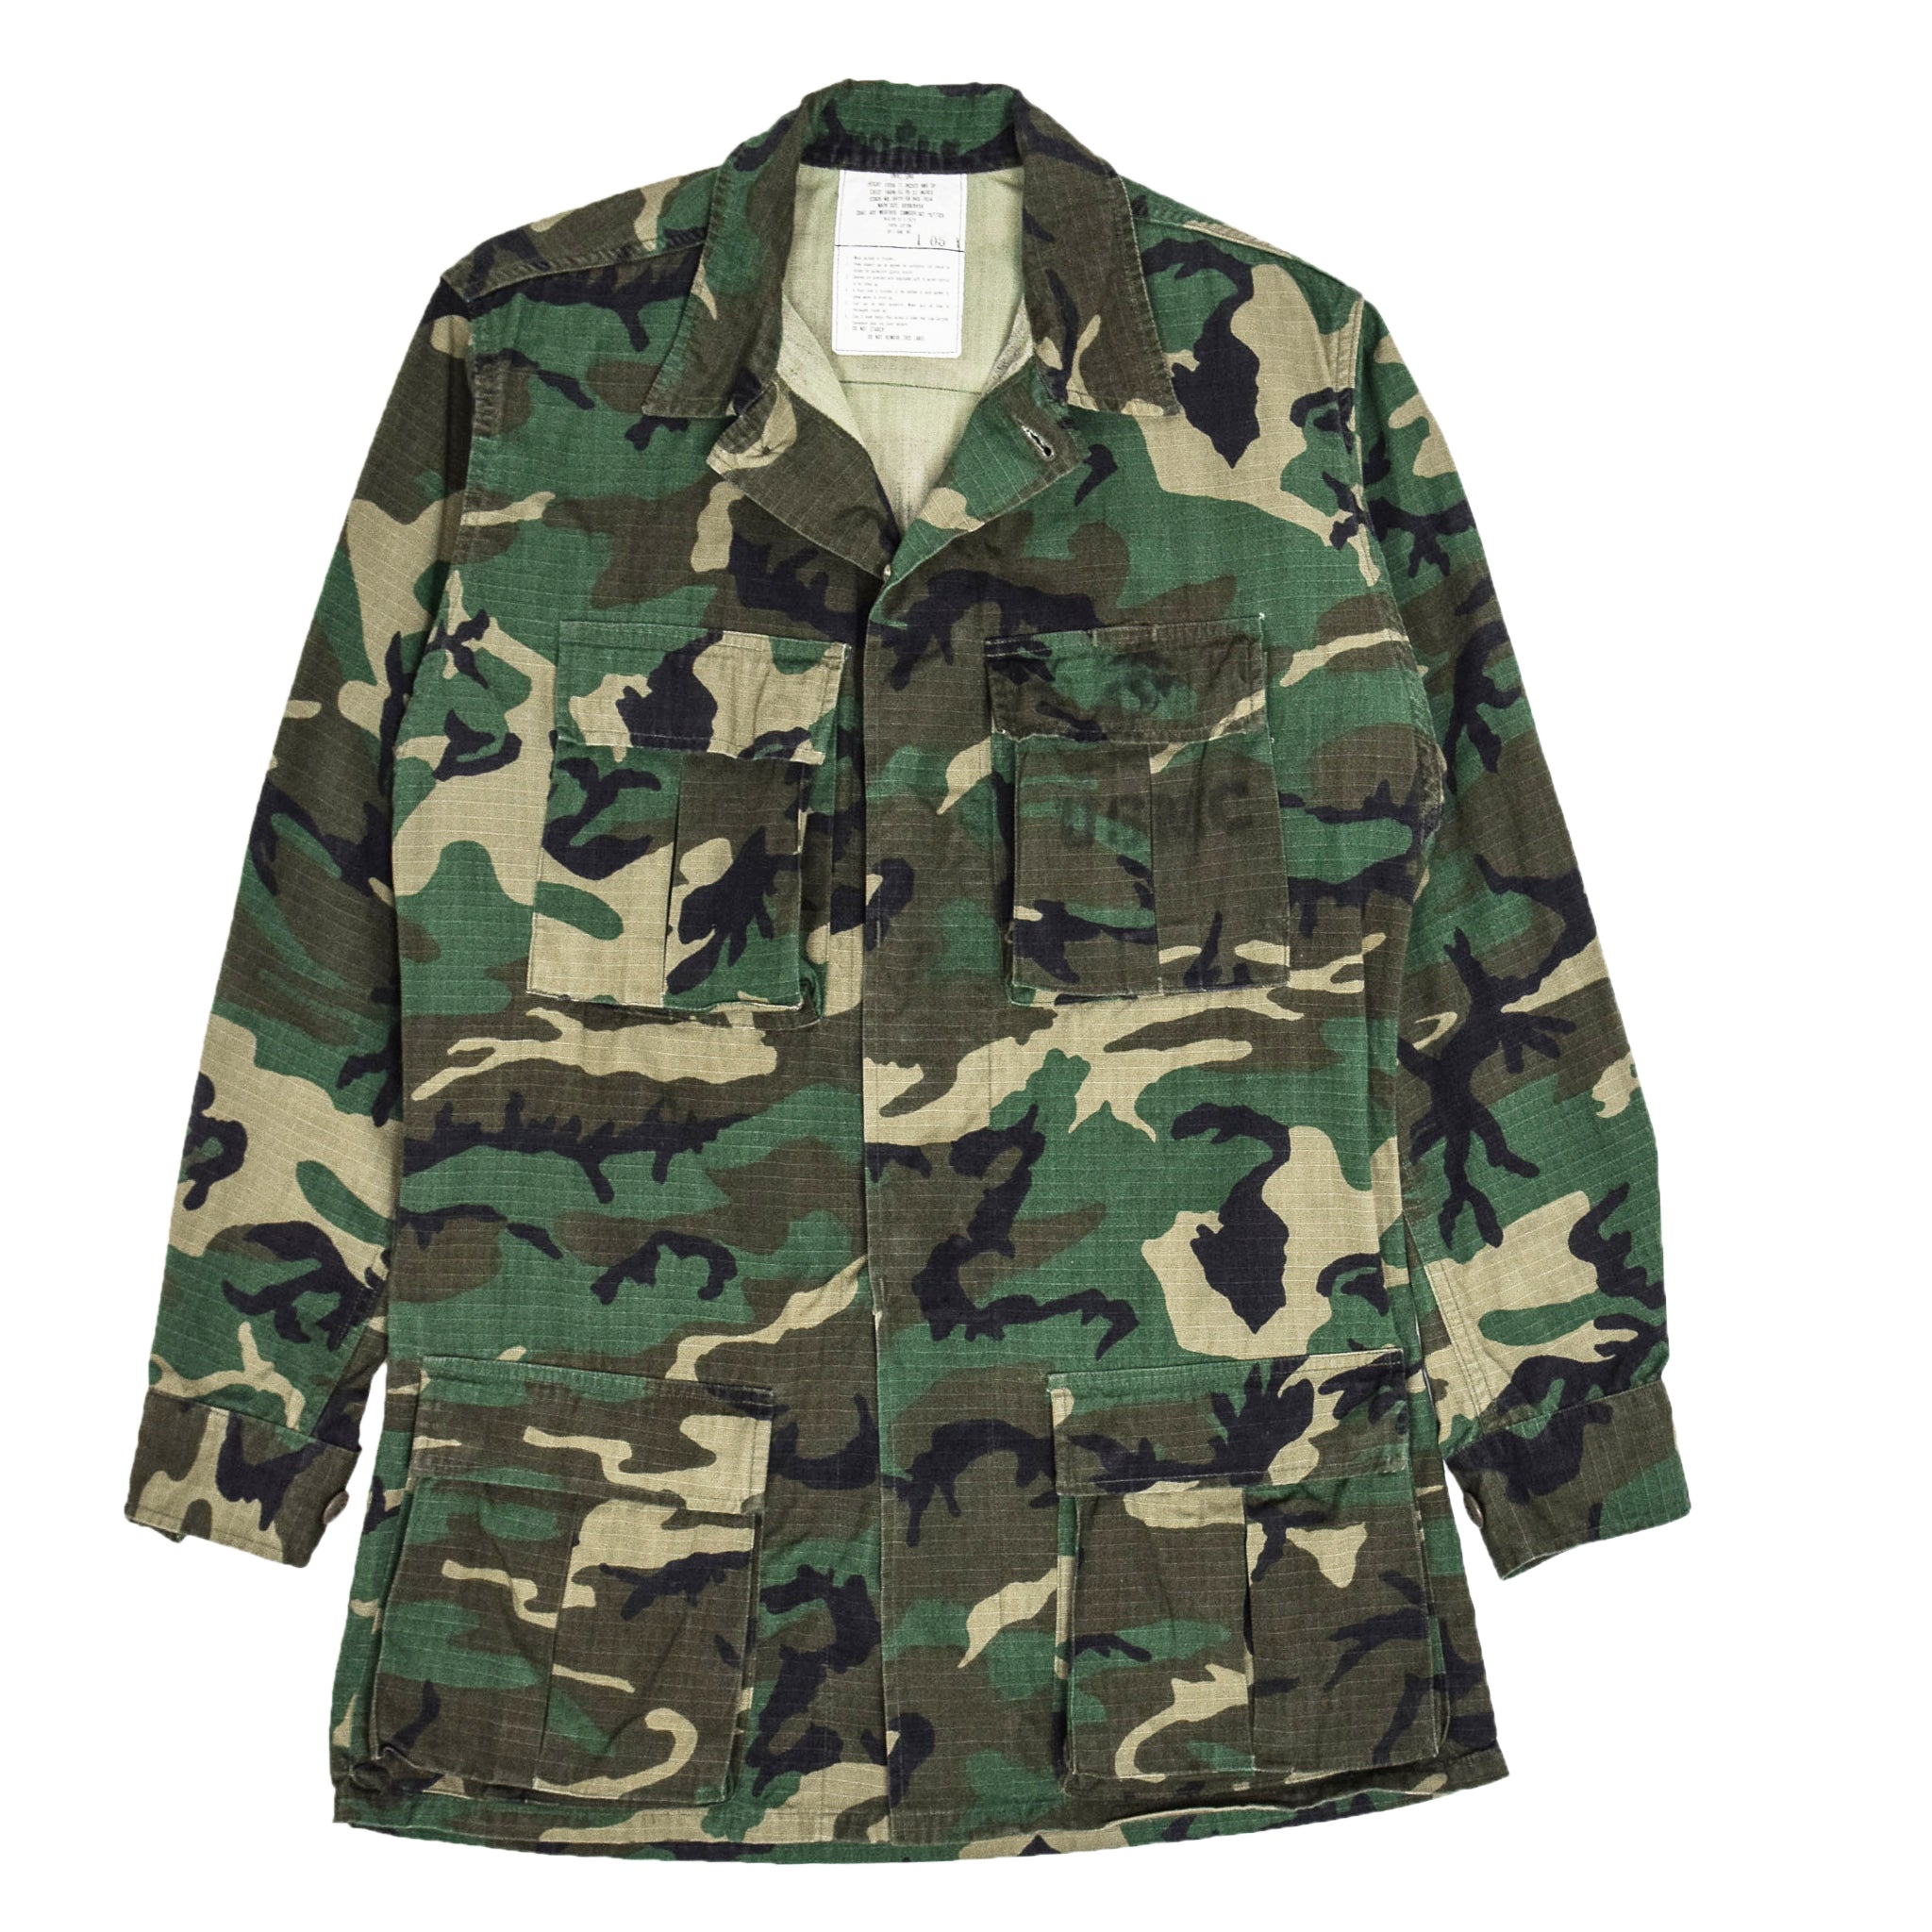 New 1990s US army woodland BDU camouflage jacket coat camo military ripstop